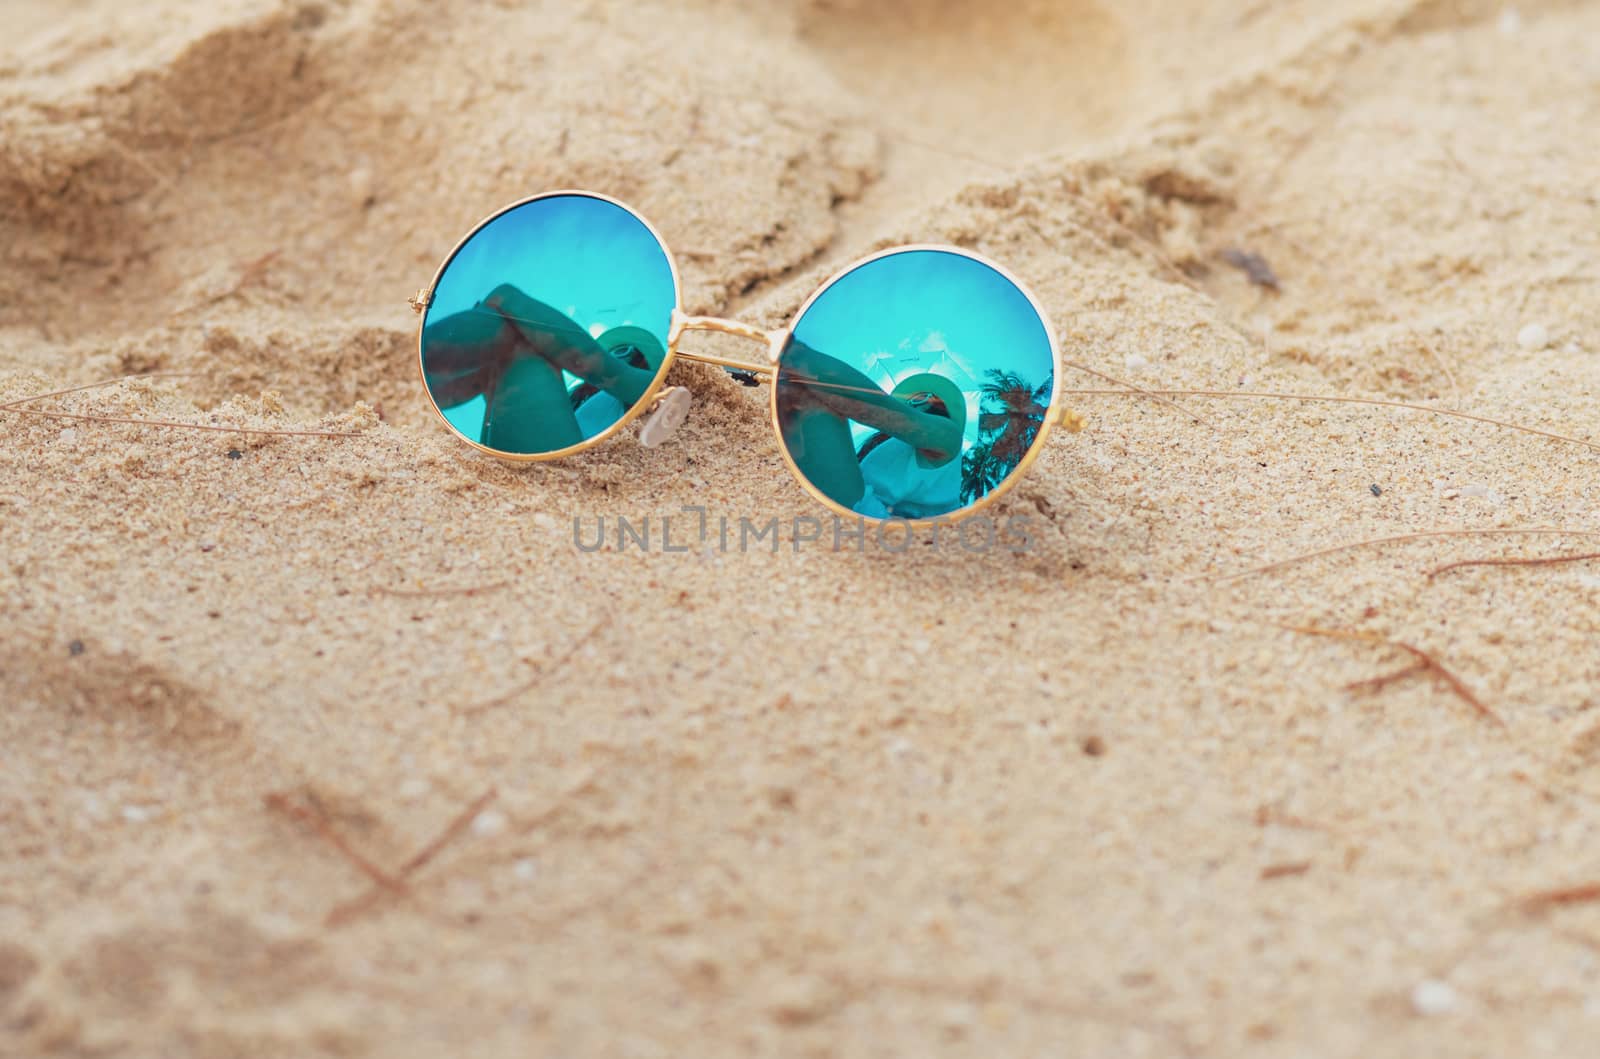 Sunglasses put on sand beach. Reflection of woman sit on sand be by Fahroni